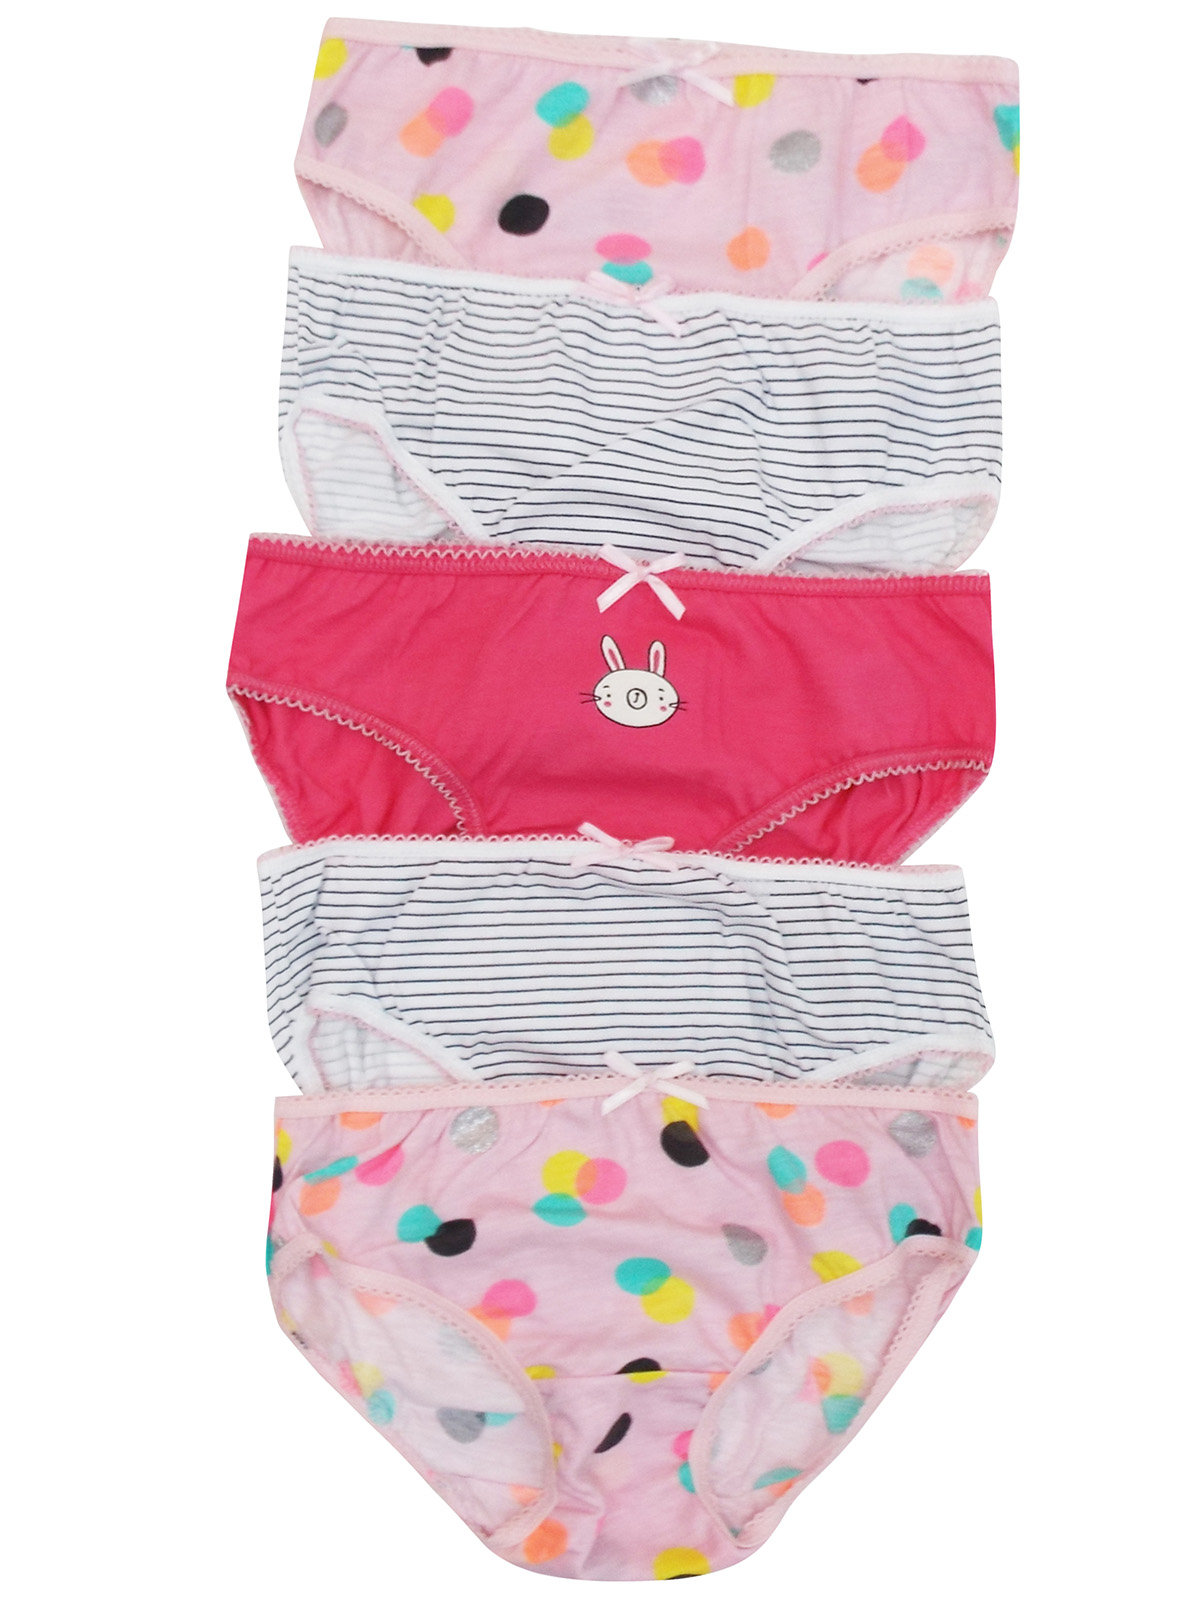 Wholesale Mothercare clothing and lingerie - - M0THERCARE PINK 5-Pack Pure  Cotton Stars & Stripes Printed Briefs - Age 1.5/2Y t